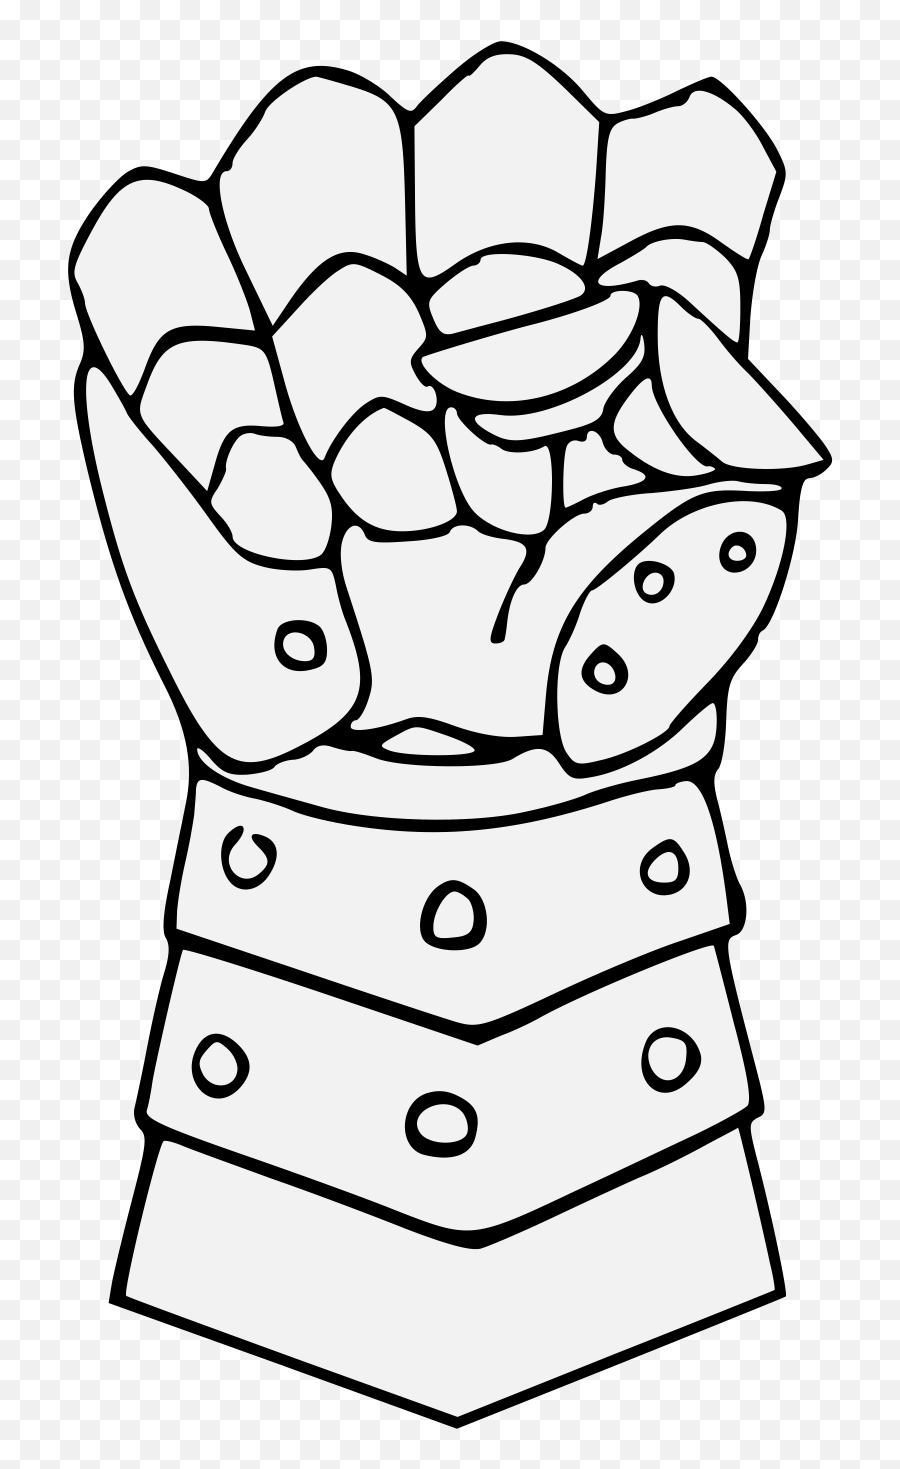 Gauntlet - Traceable Heraldic Art Gauntlet Clipart Png,Clenched Fist Icon